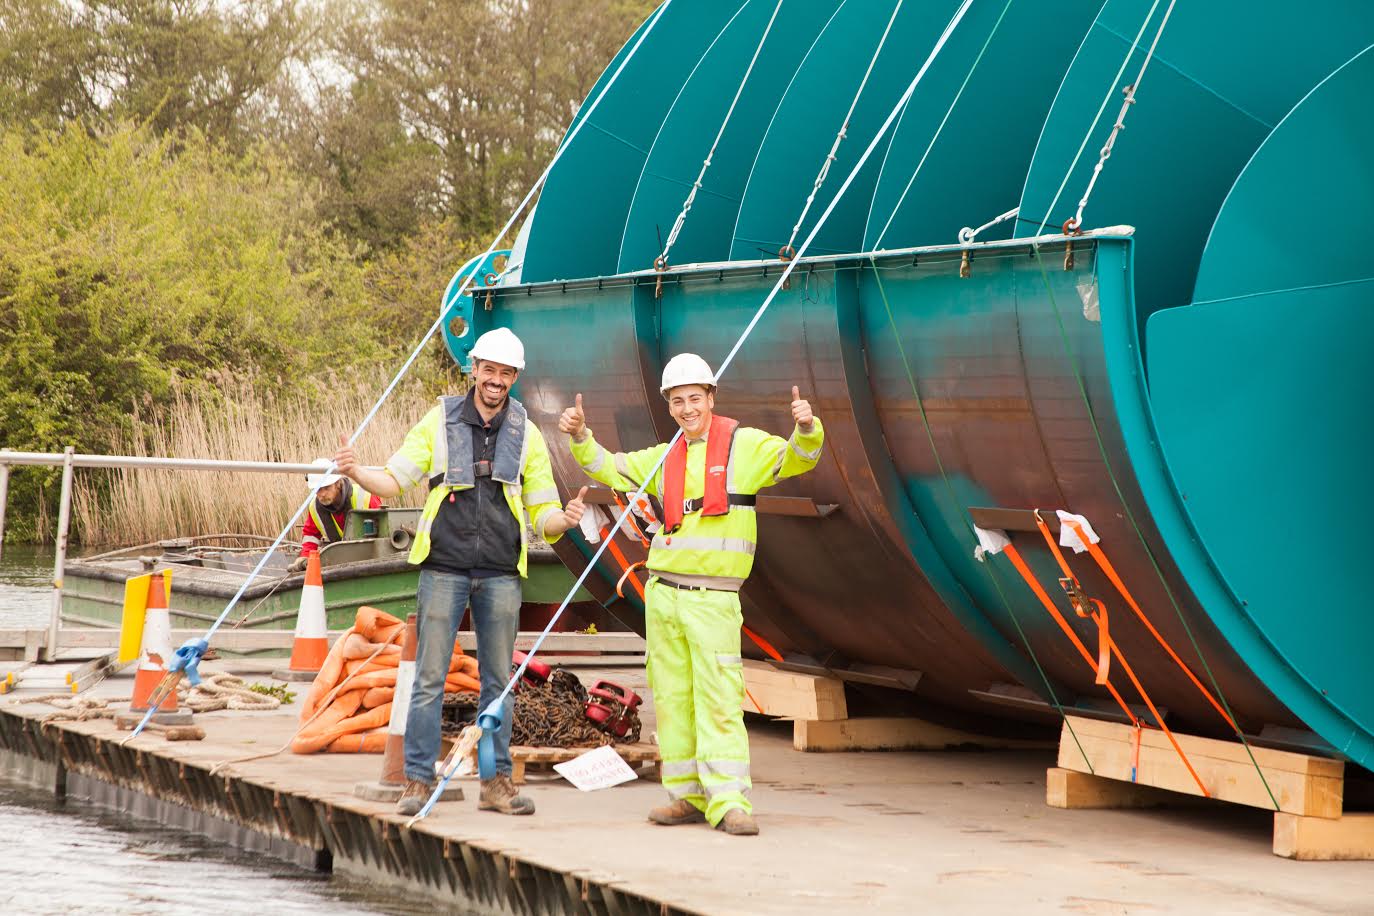 Sandford Hydro construction - the Archimedes screws being floated along the river